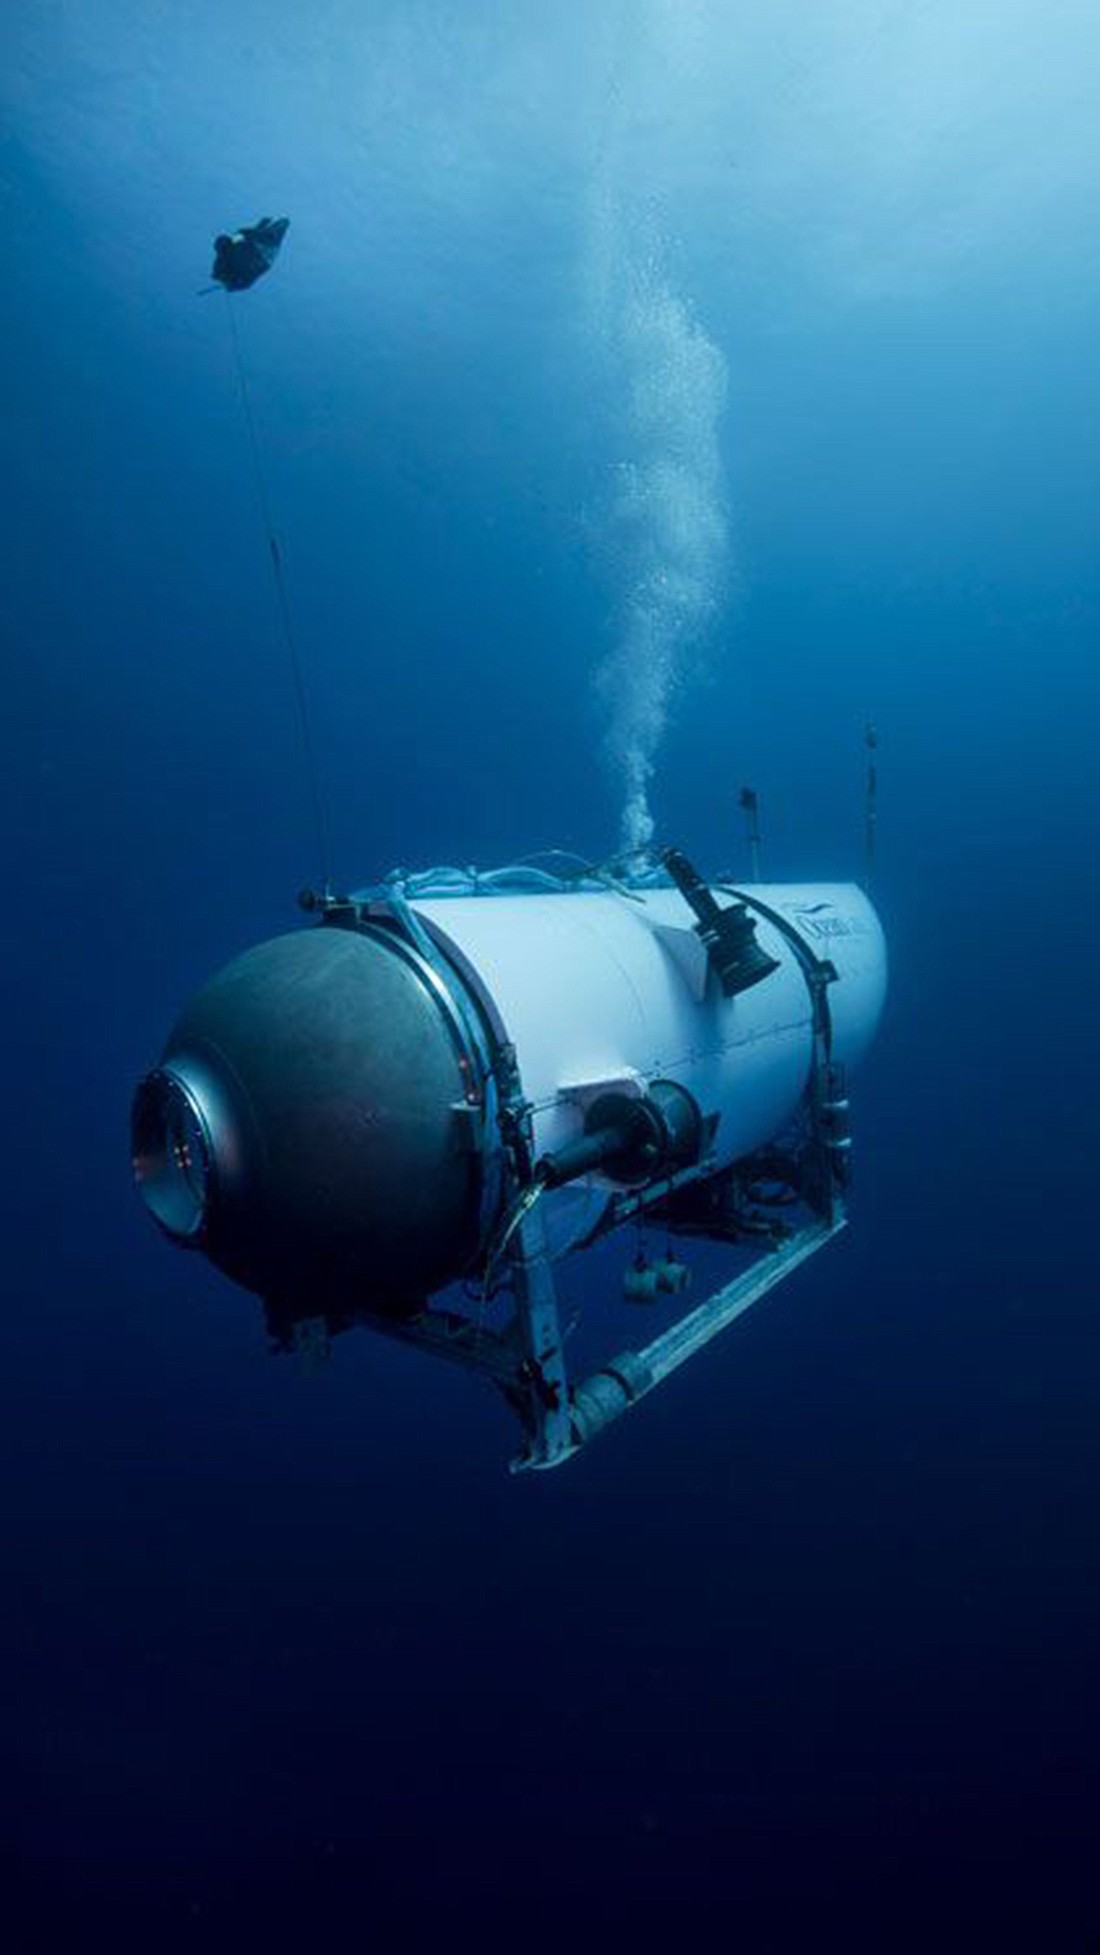 The deepwater submersible Titan, operated by OceanGate Expeditions of Everett, is the subject of a search by multiple agencies after failing to return with five passengers from a dive to the wreckage of the Titanic off the coast of Newfoundland June 18.